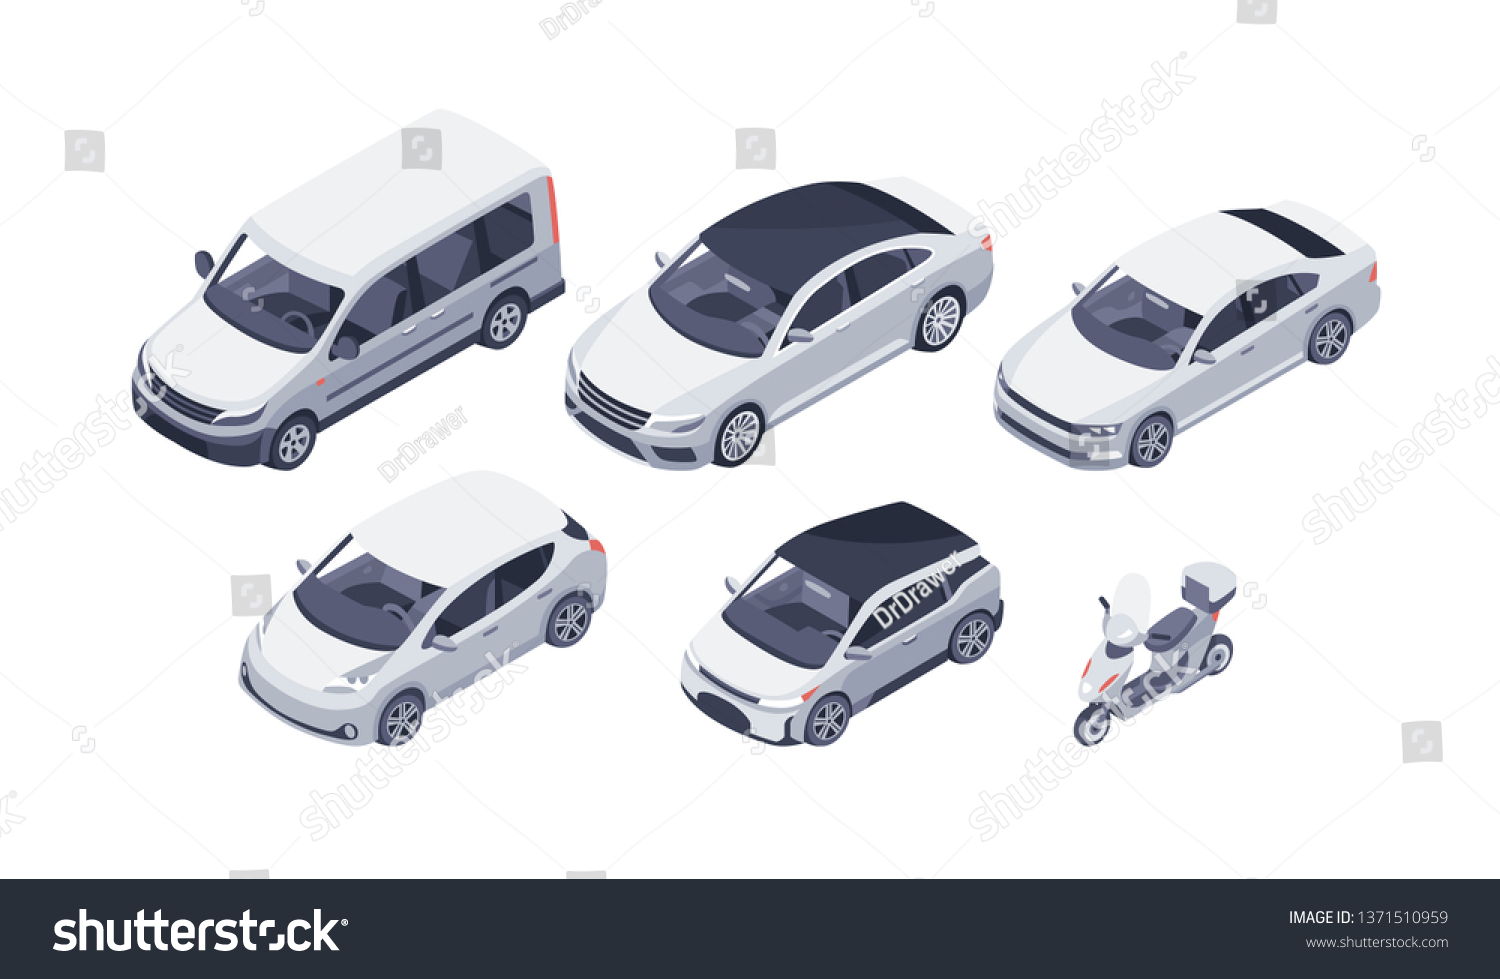 Flat isometric high quality vector modern design cars. Sedan, van, electric car and scooter. For infographics, commercial, web and game design #1371510959